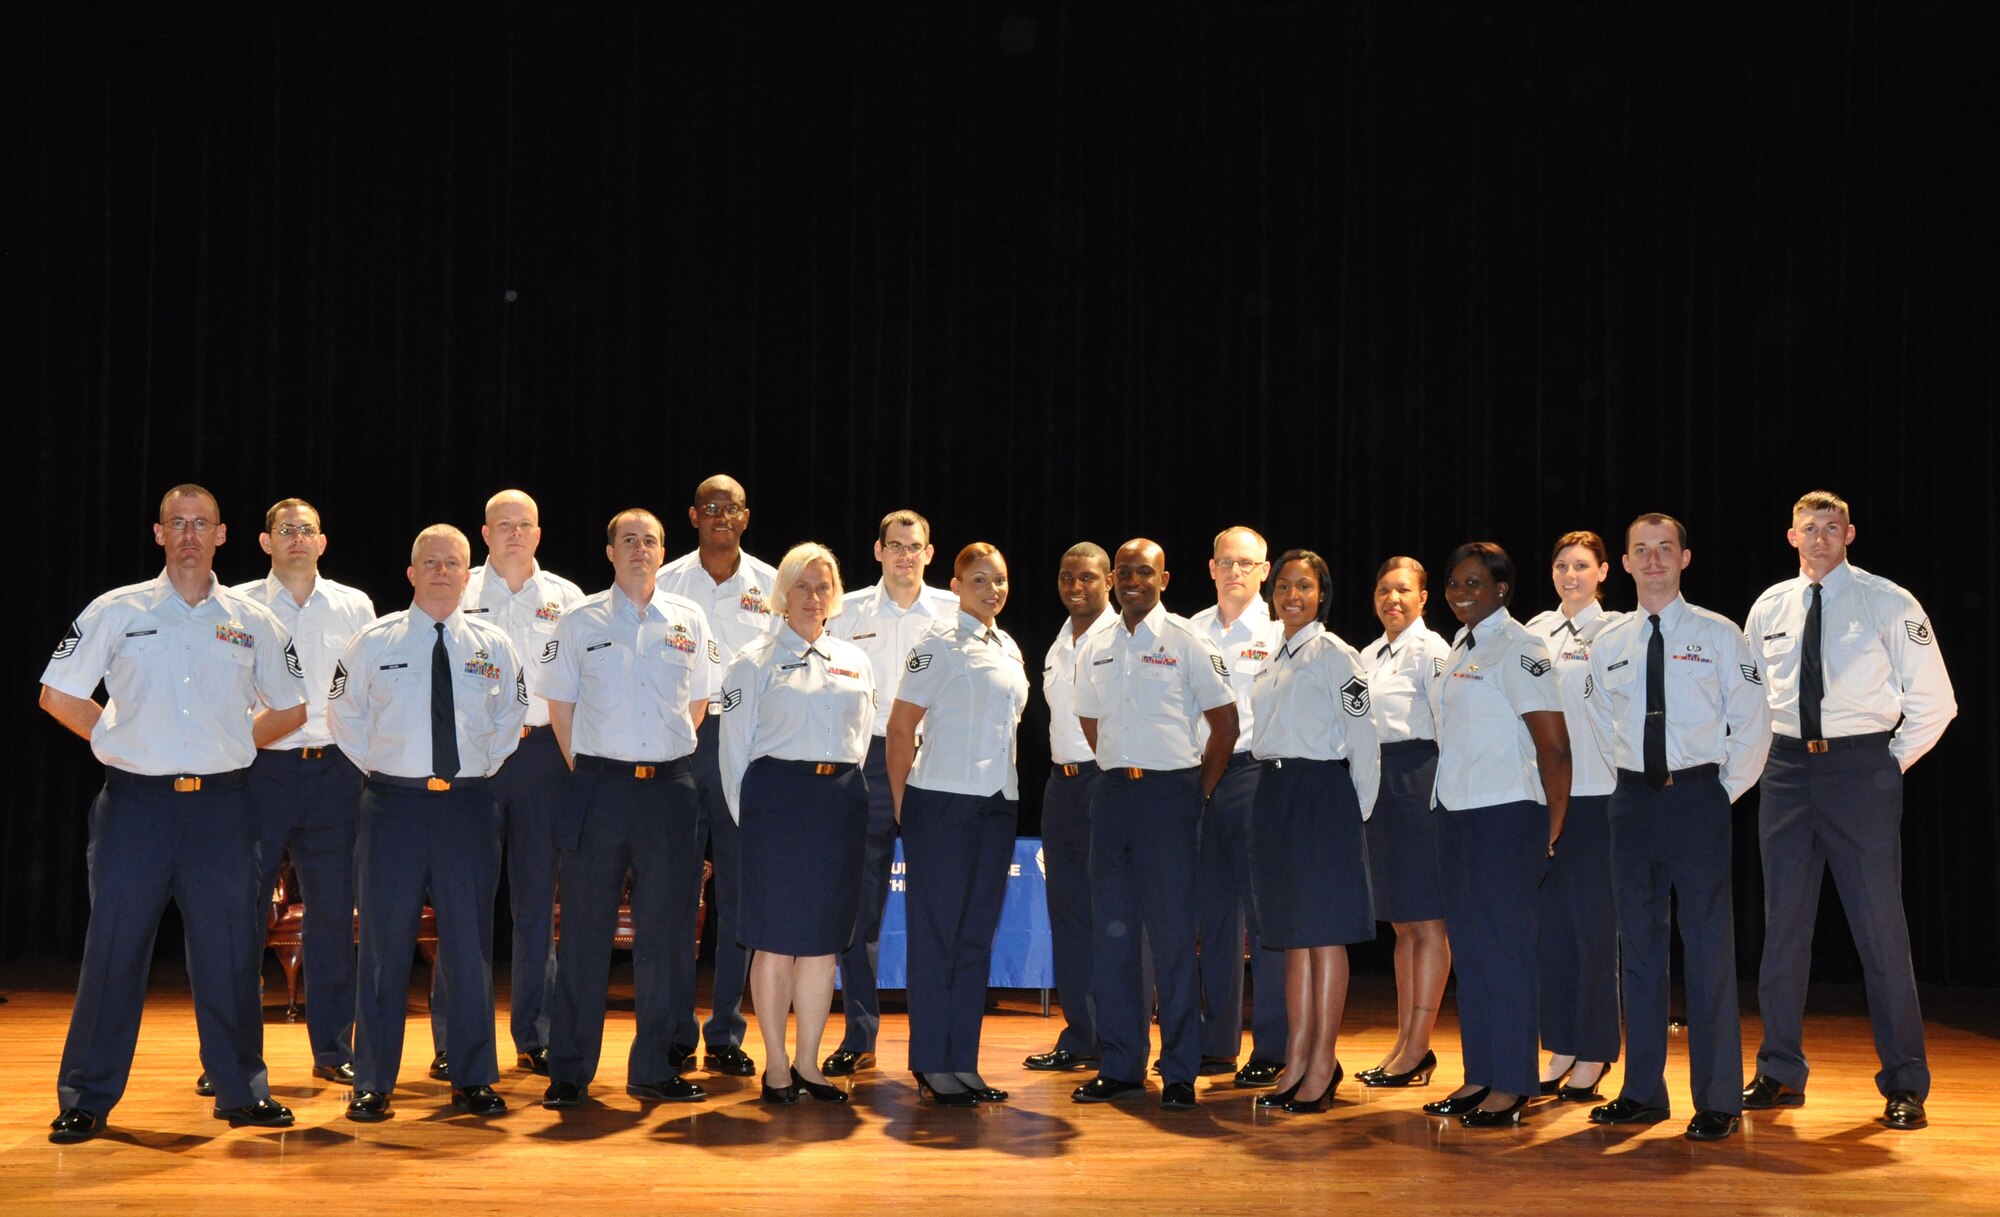 Airmen assigned to the 315th Airlift Wing at Joint Base Charleston - Air Base, S.C. celebrate their graduation from the Community College of the Air Force during the commencement ceremony at the base theatre here Sunday, May 5, 2013.